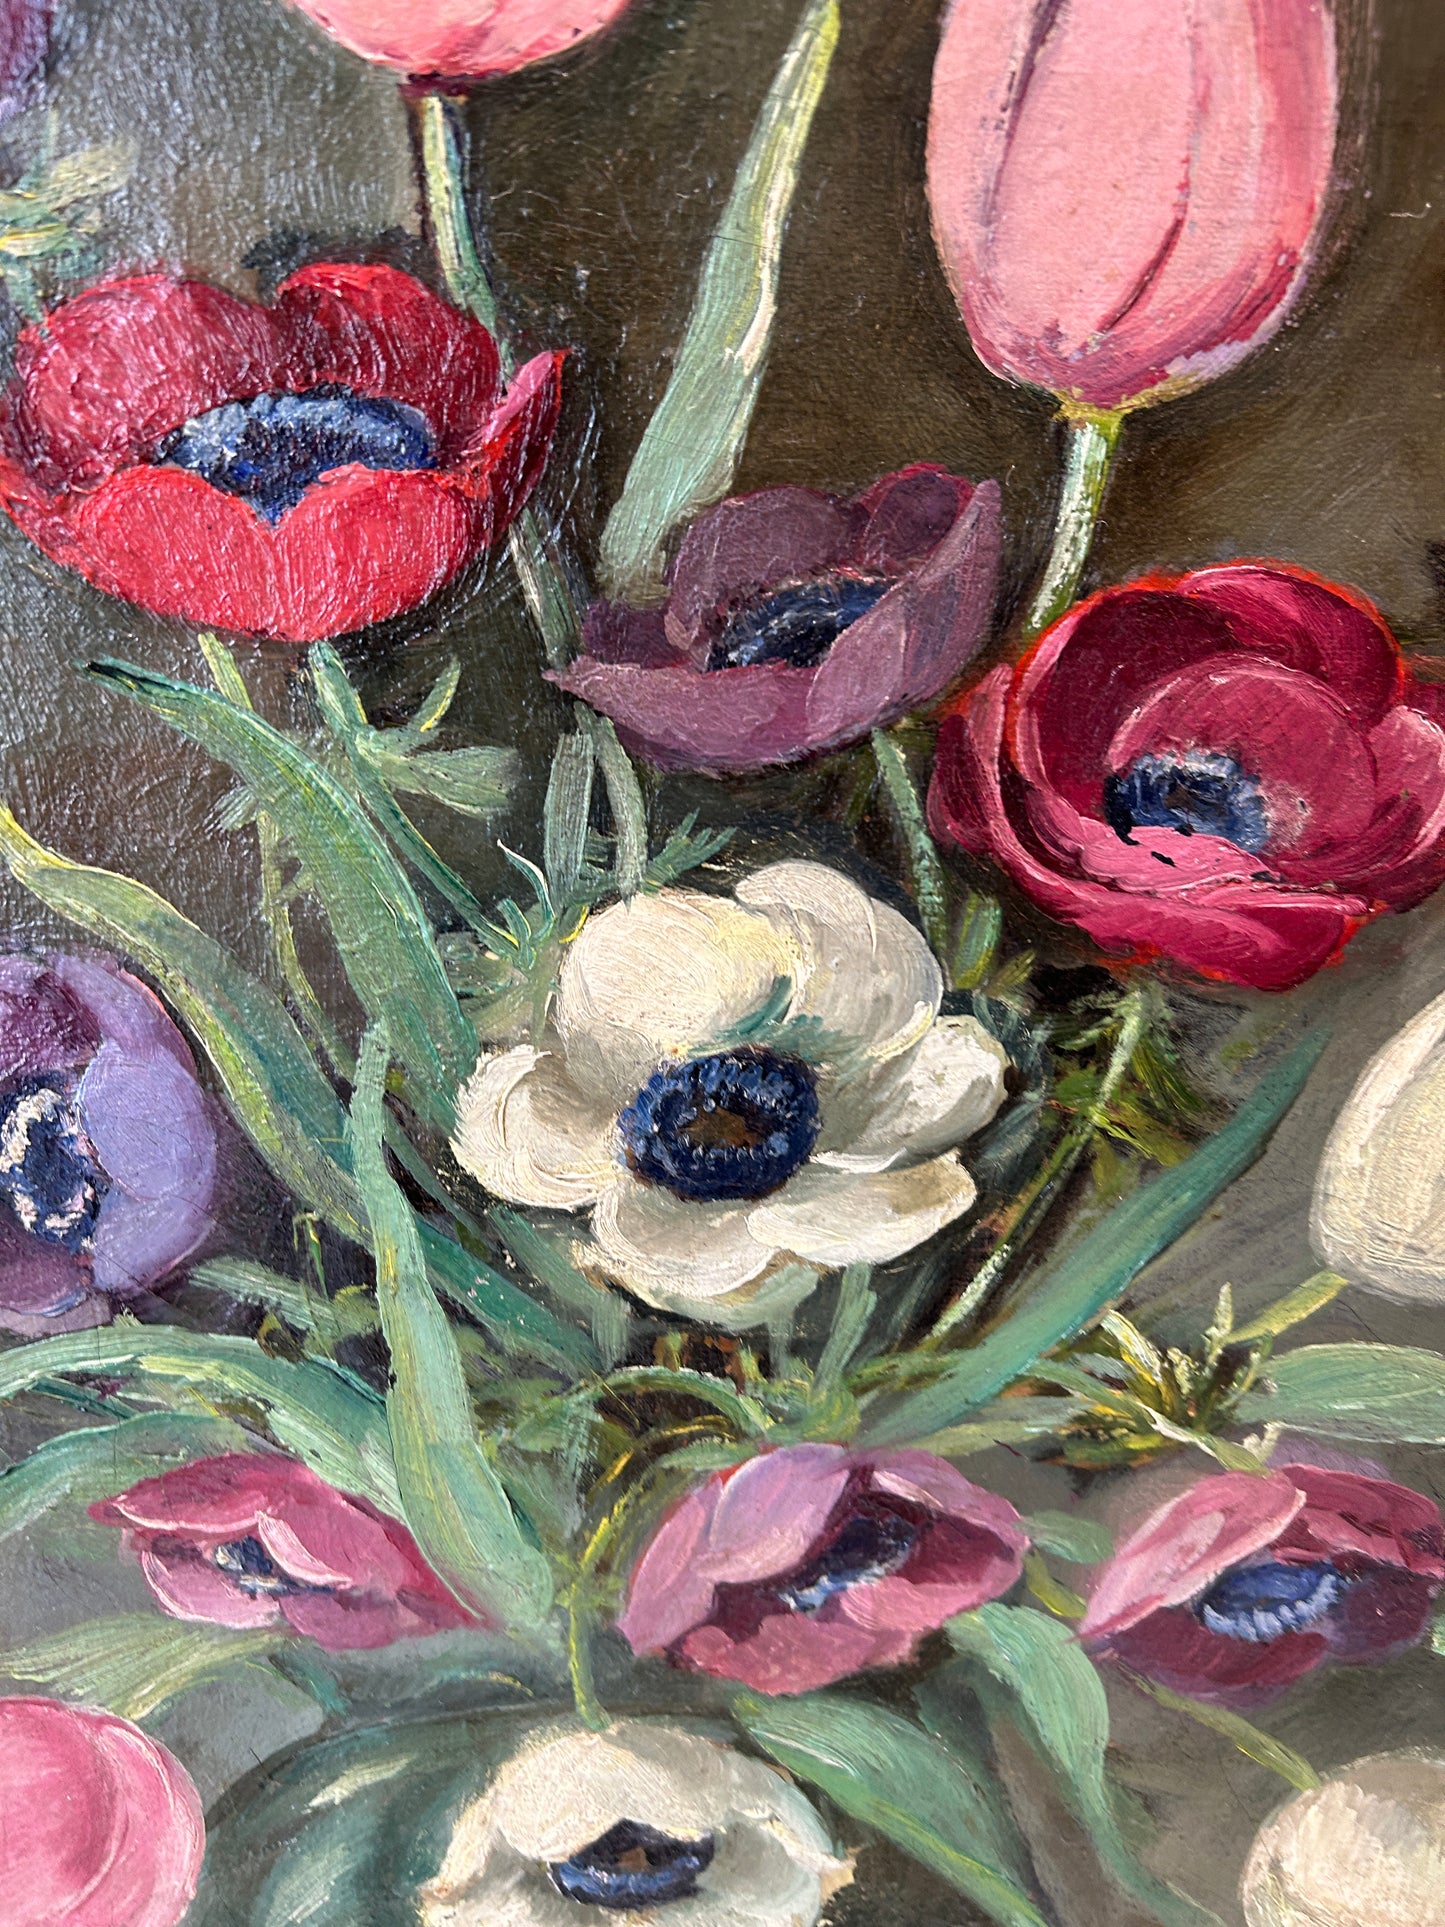 Feels Like Spring! 1950's Floral Oil on Canvas